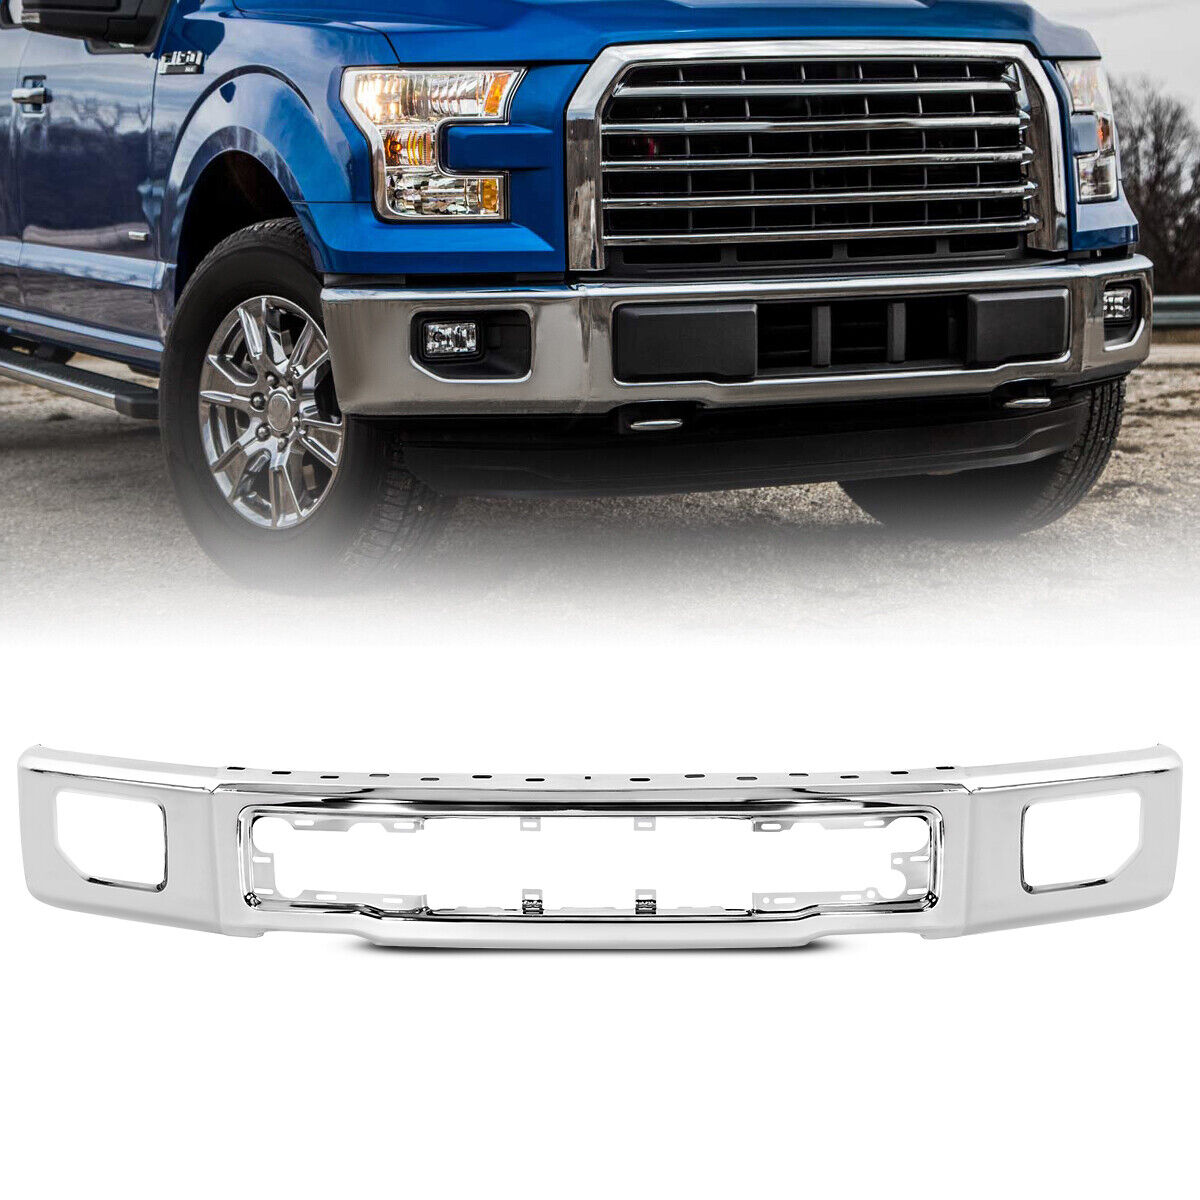 Chrome Steel Front Bumper Face Bar for 2015-2017 Ford F-150 w/ Fog Light Hole